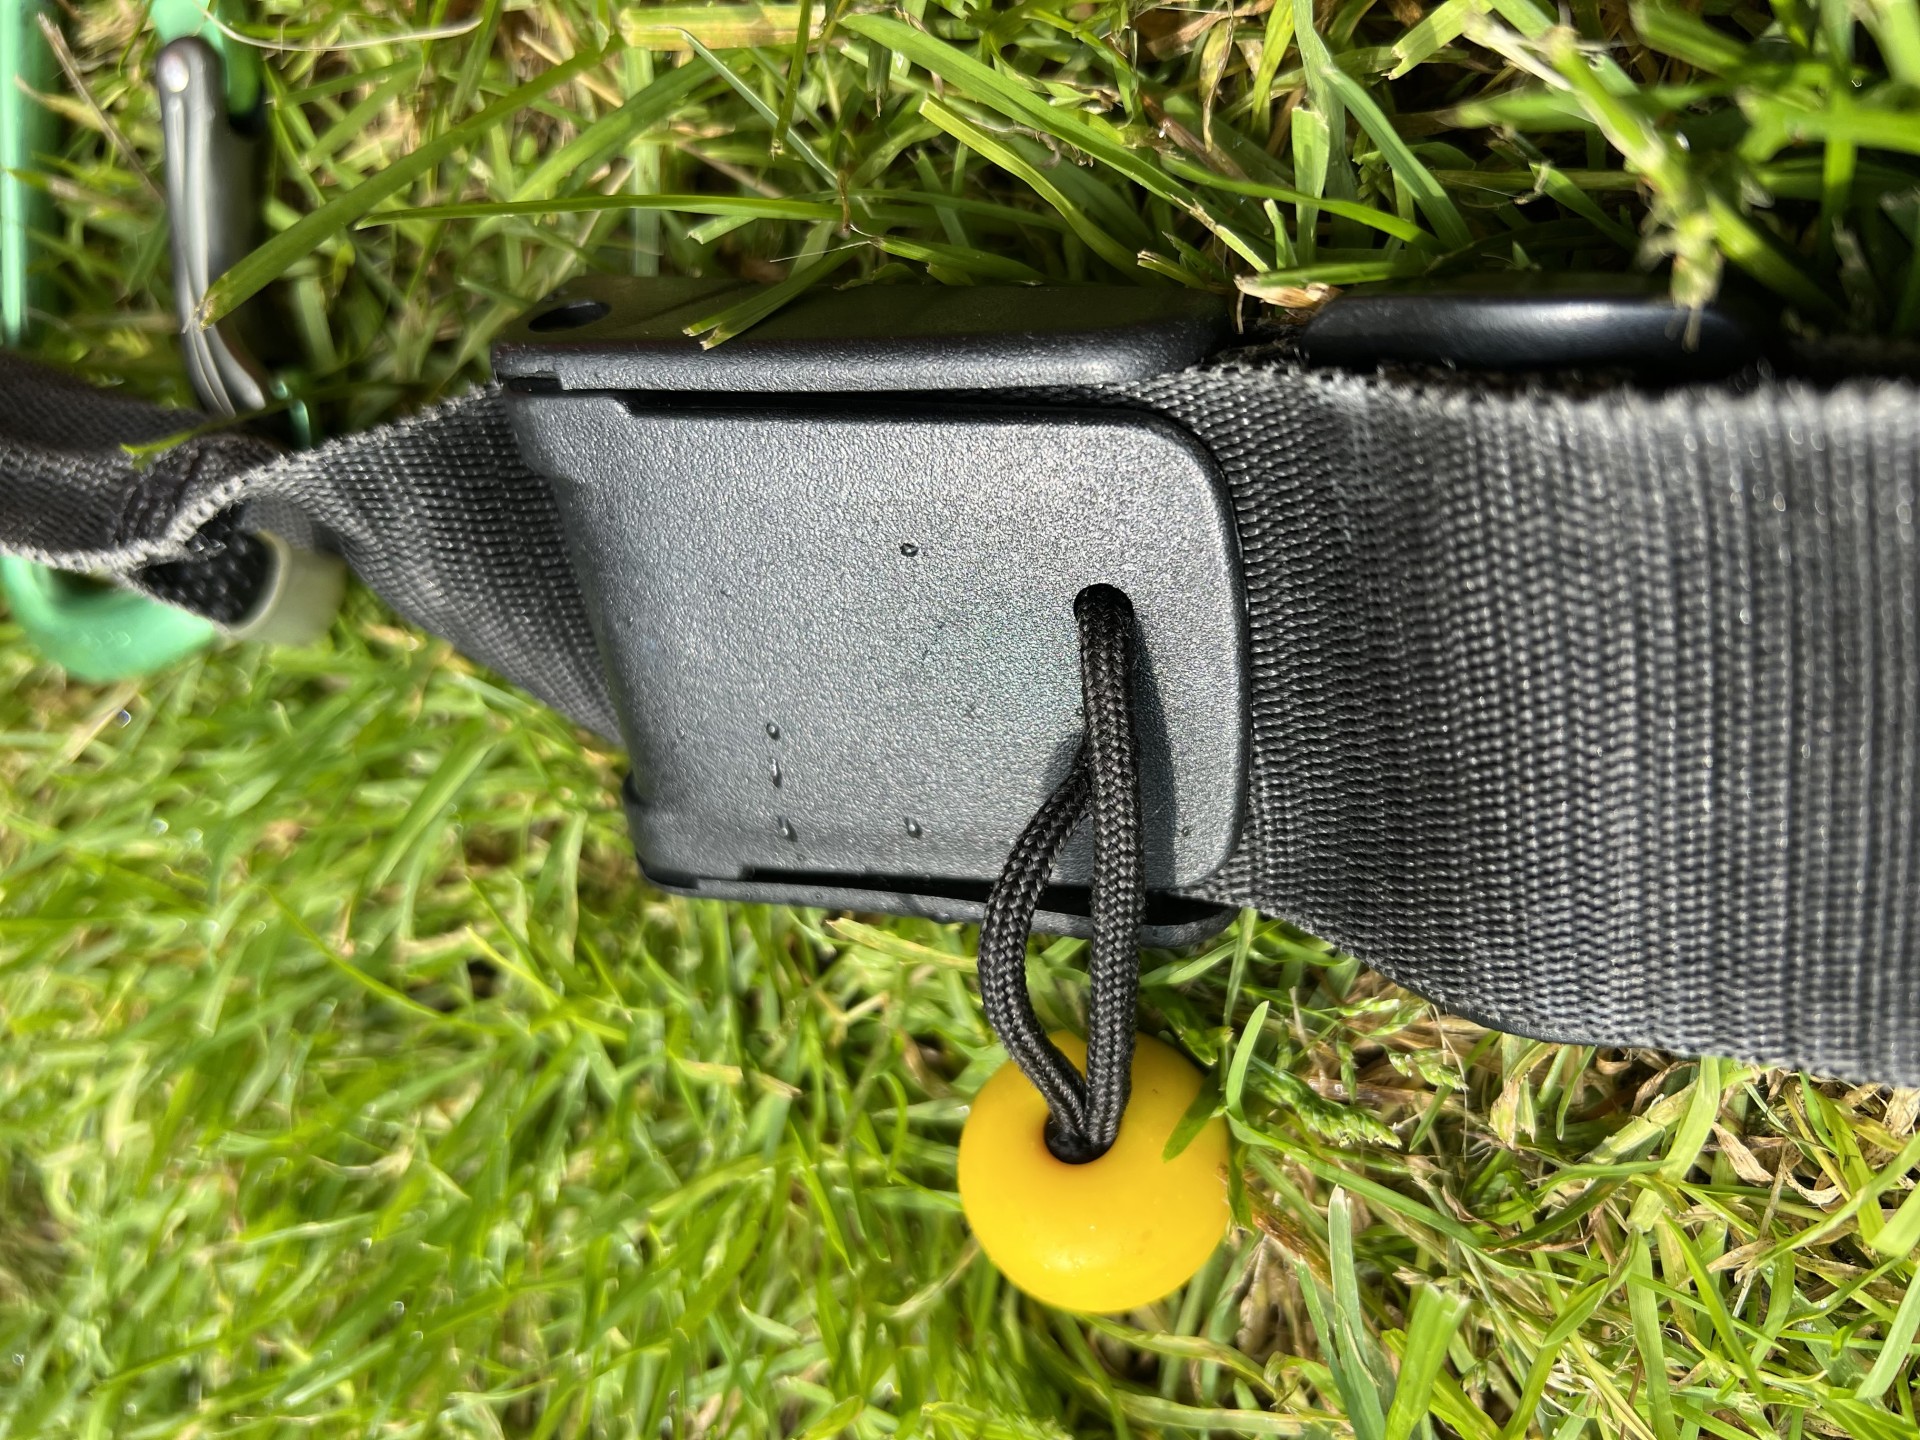 Quick release buckle with ball toggle for ease of use with cold hands.